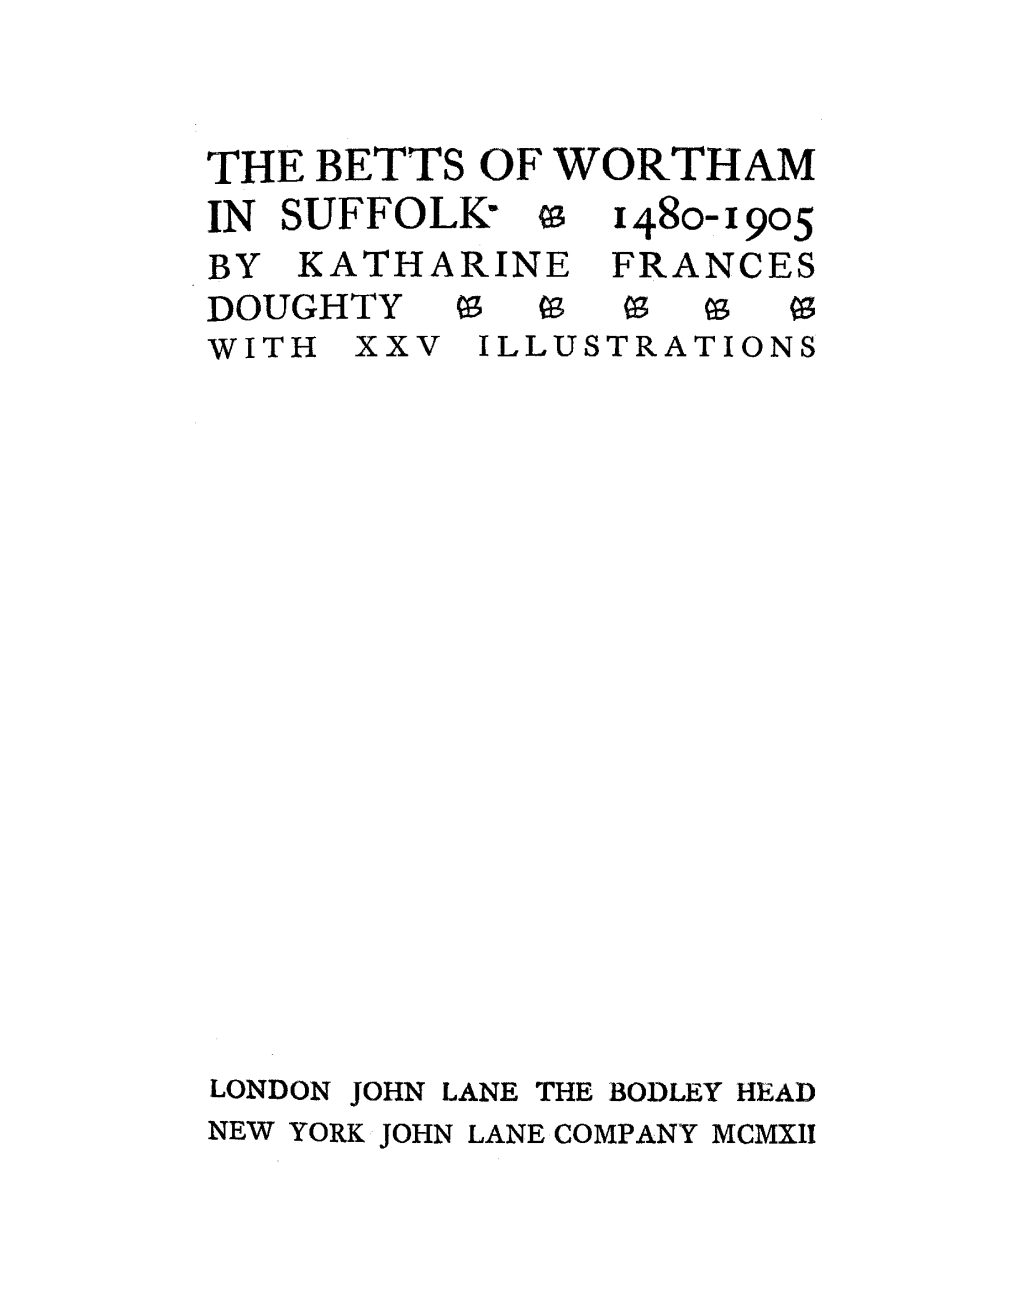 The Betts of Wortham in Suffolk· (B 1480-1905 by Katharine Frances Doughty ~ W ~ W ~ with Xxv Illustrations